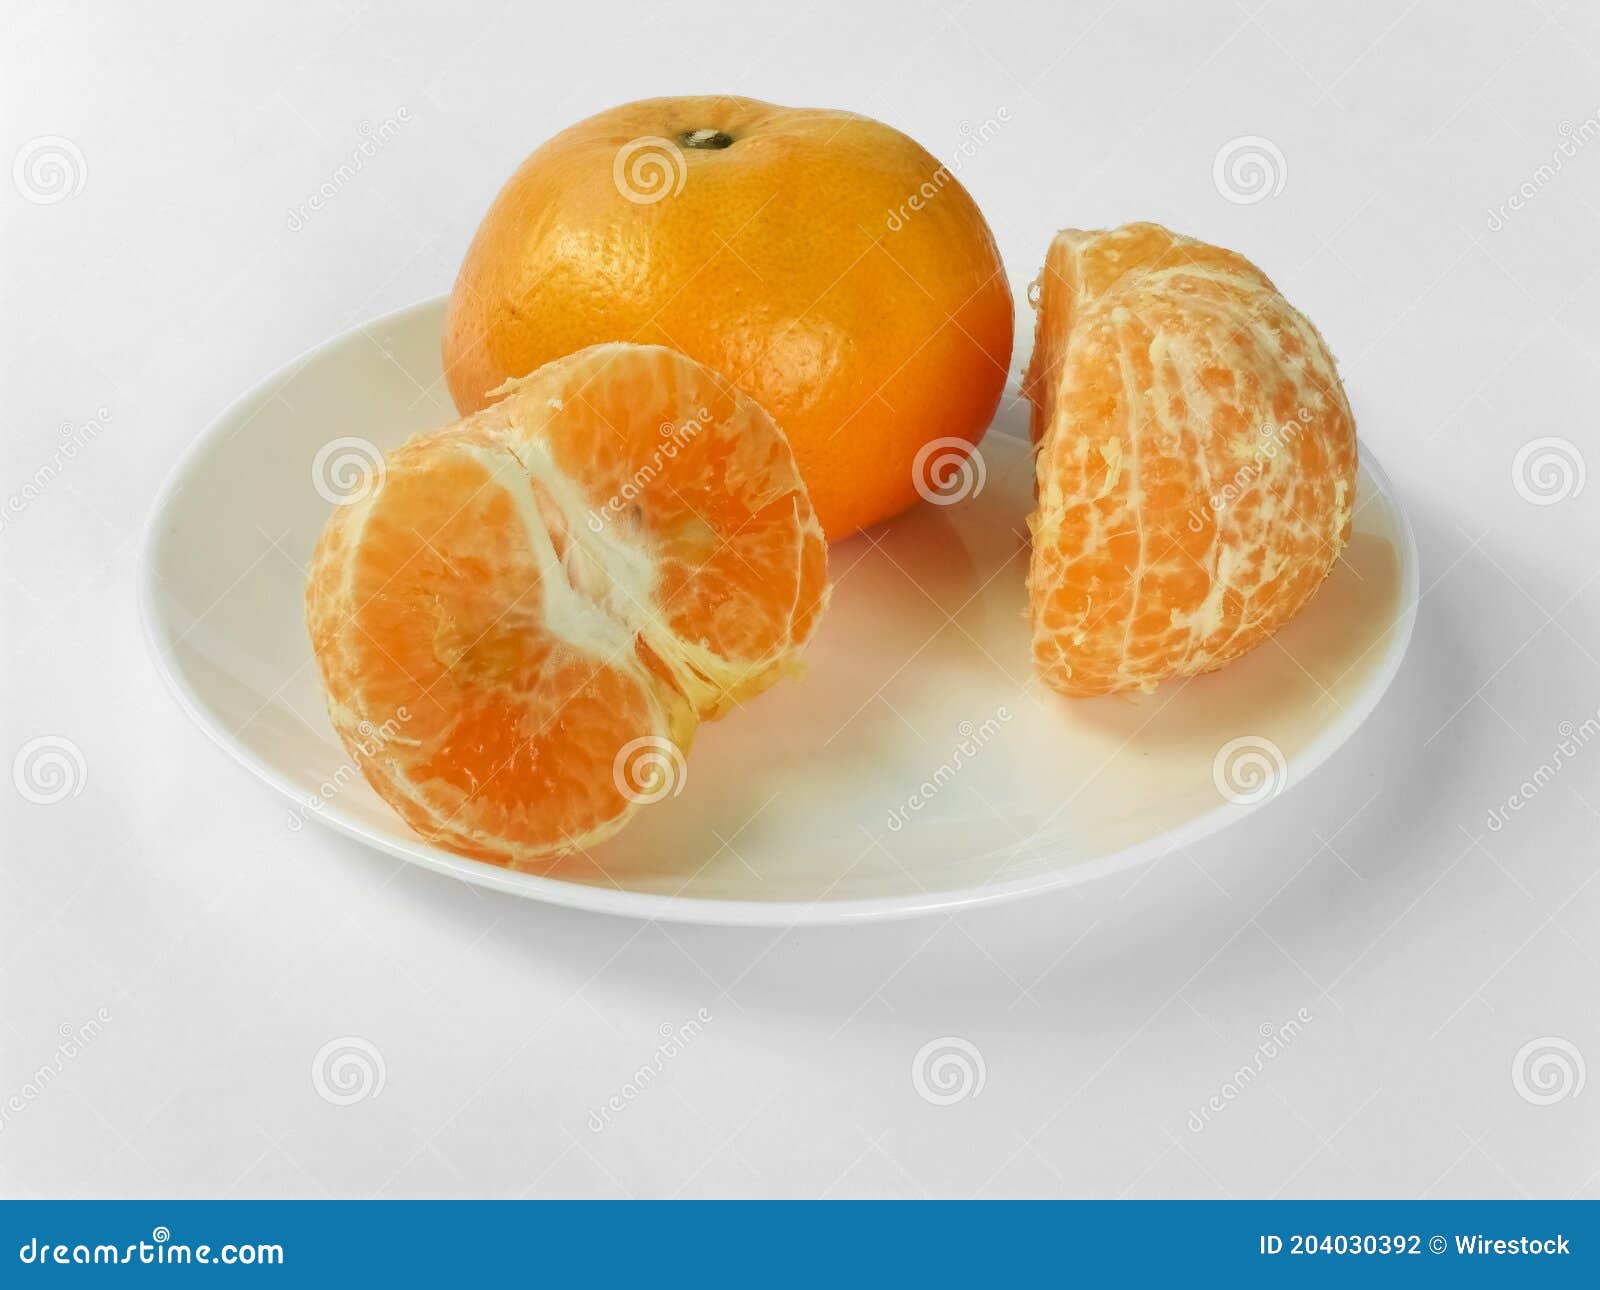 closeup of juicy ripe orange tangerines (citrus reticula) peeled on a plate with a white background